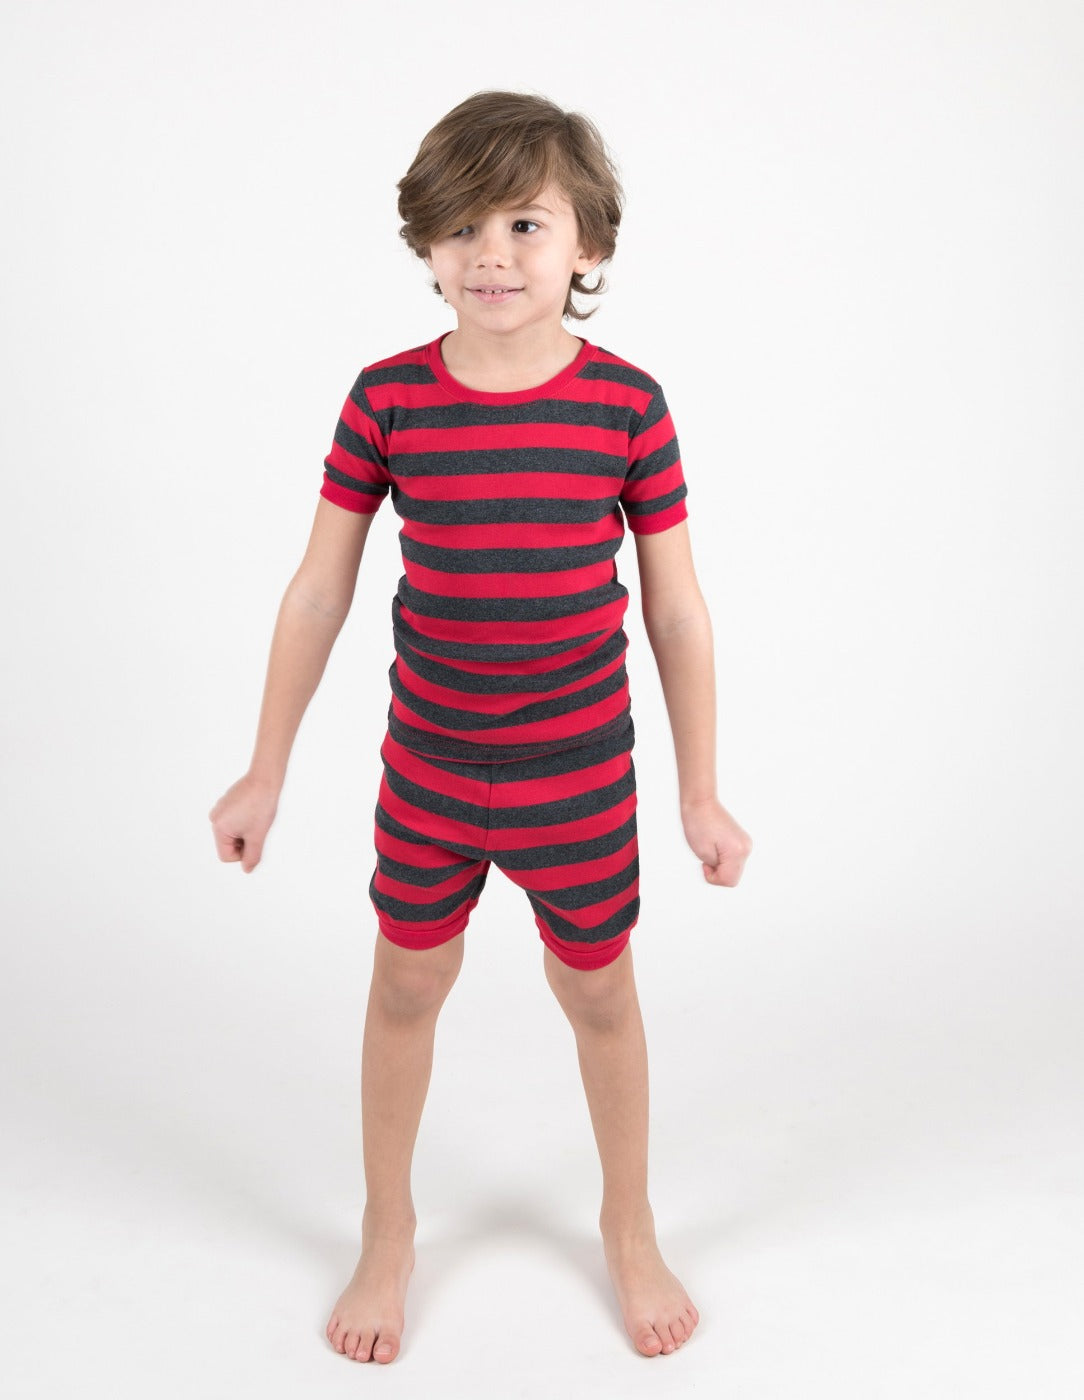 red and grey striped shorts kids pajama